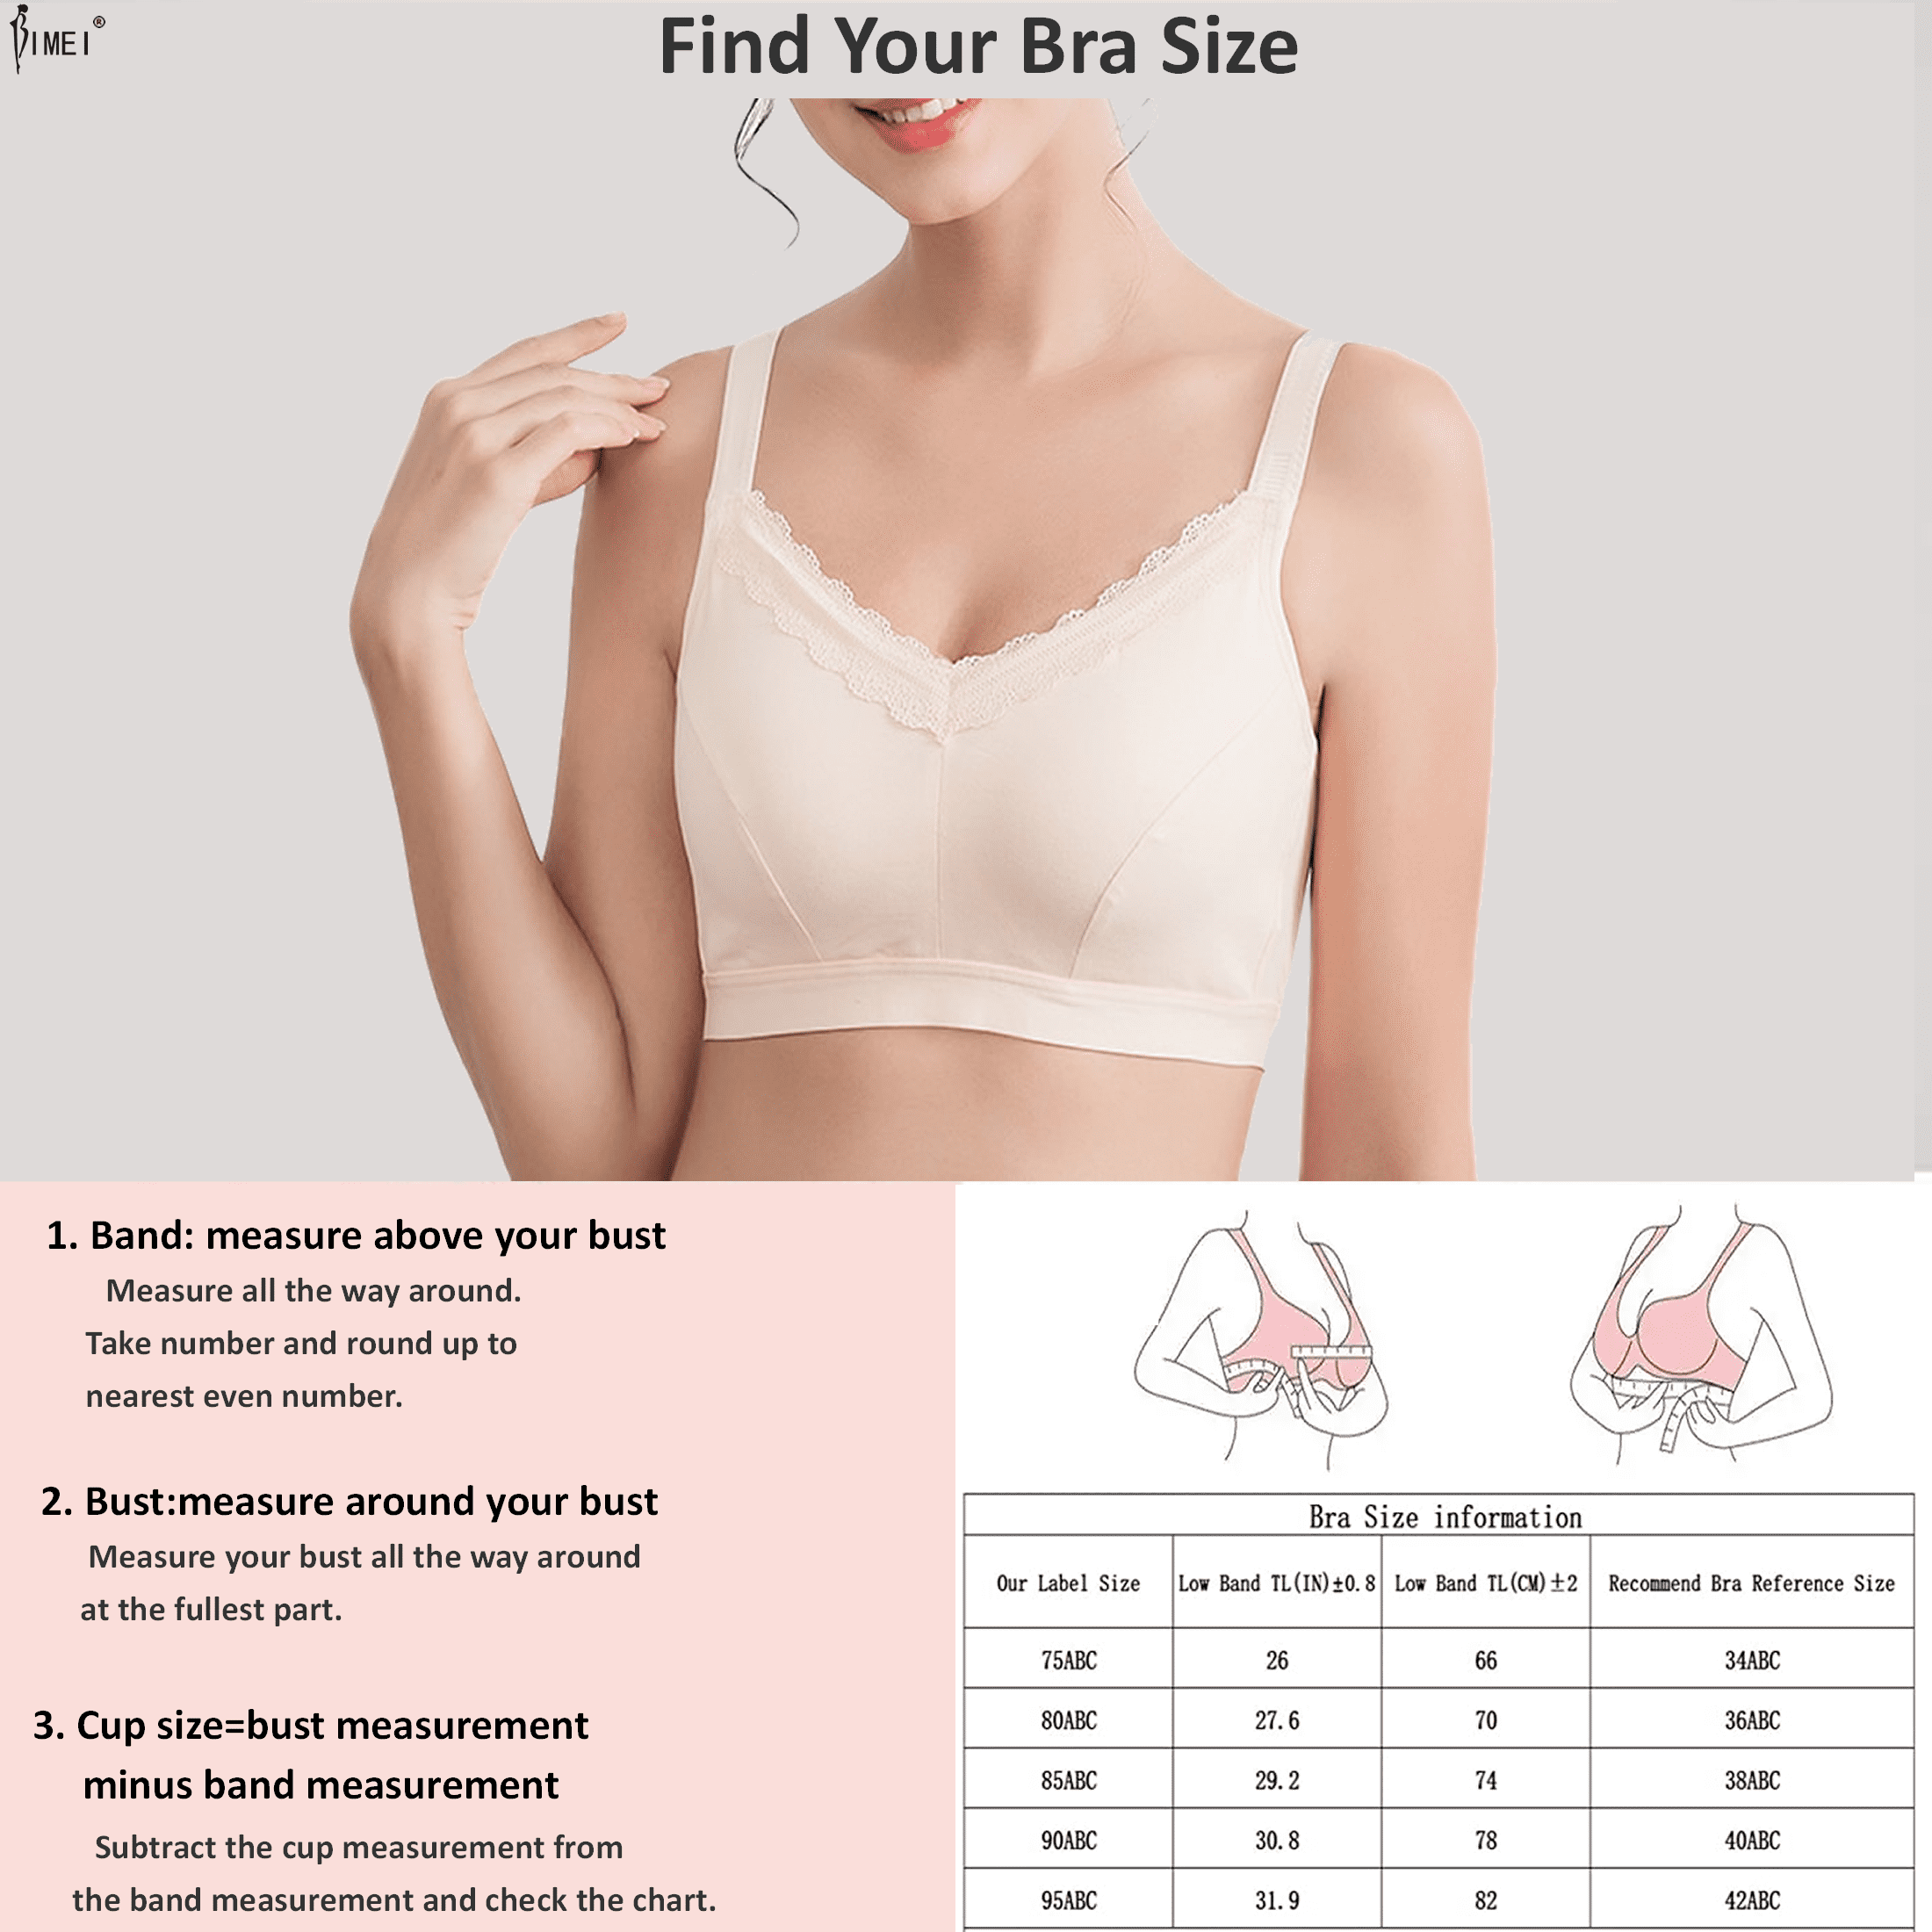 BIMEI Mastectomy Bra with Pockets for Breast Prosthesis Women's Full  Coverage Wirefree Everyday Bra plus size 8102,Pink,34C